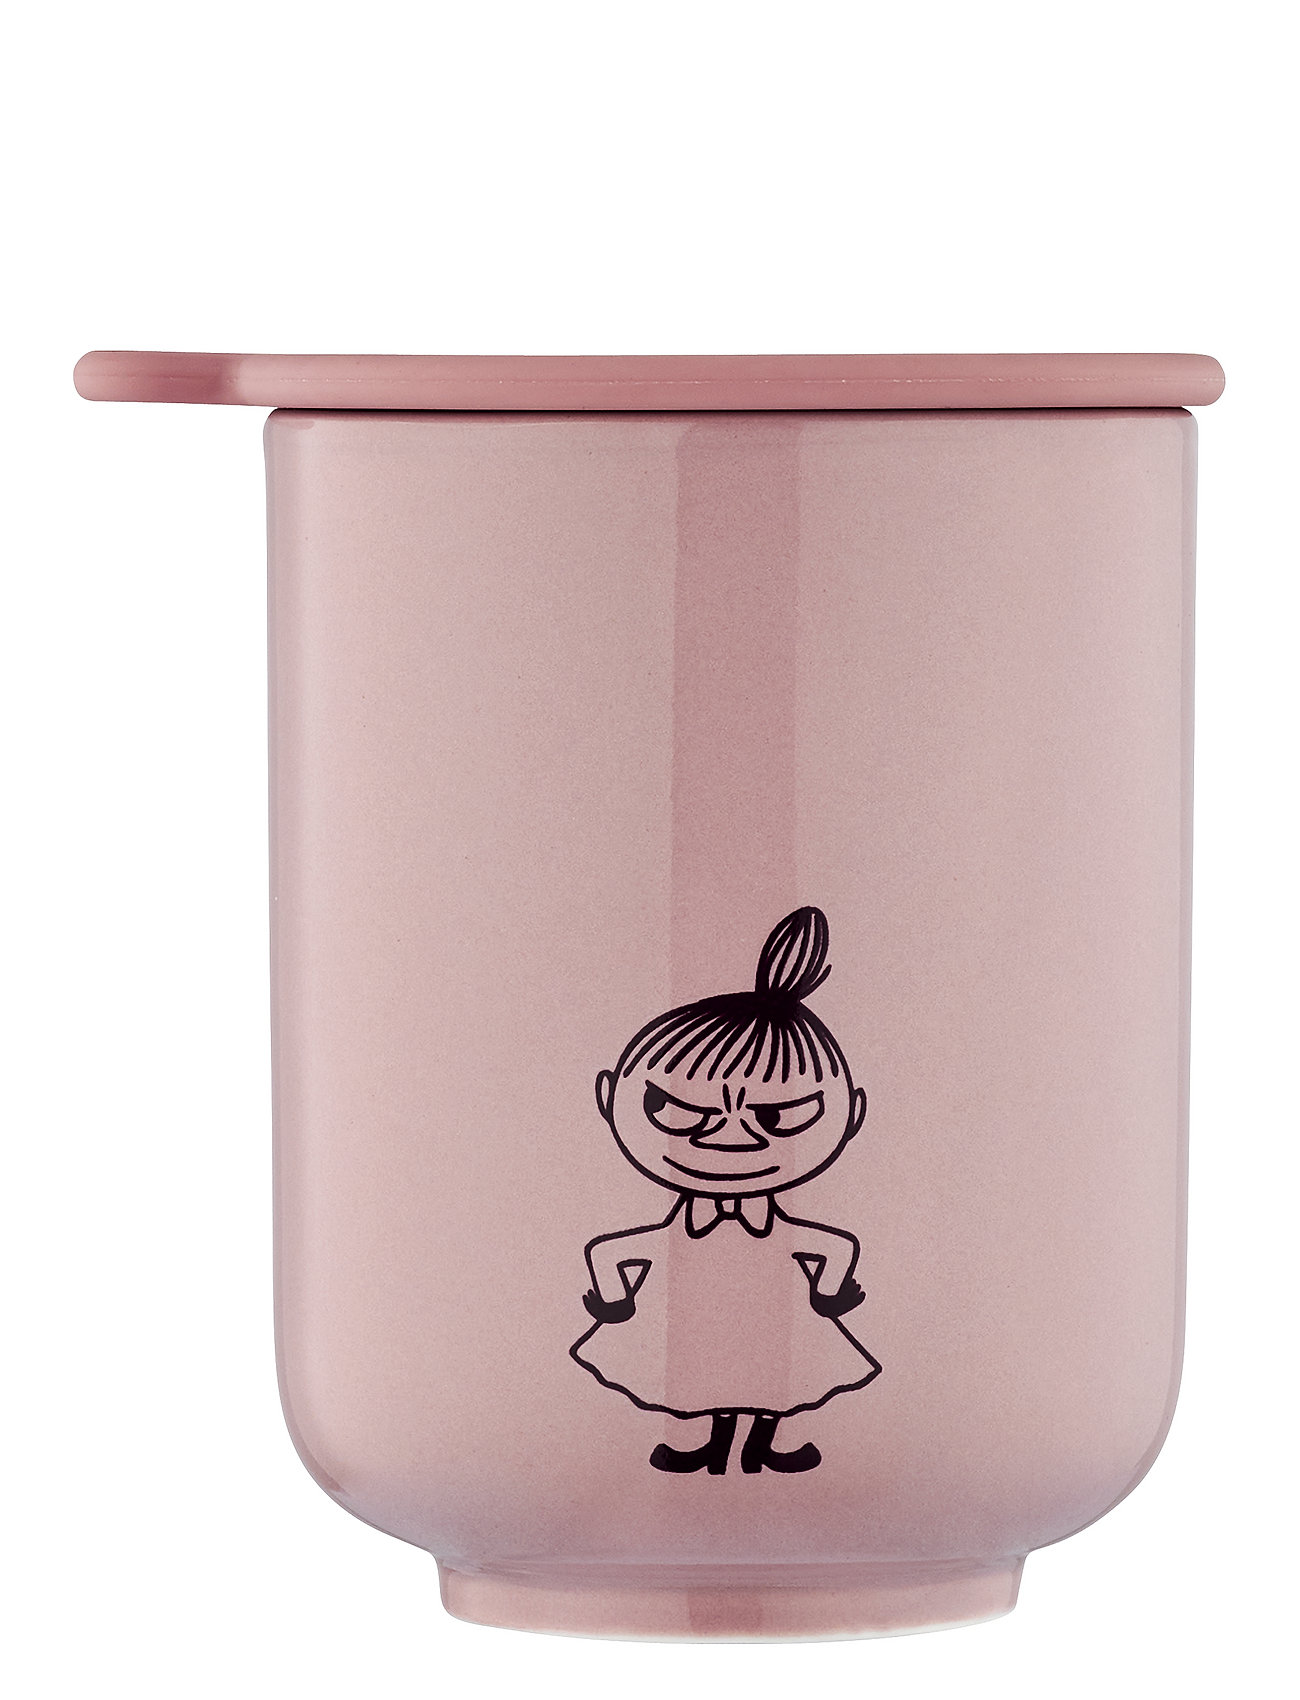 The Moomins Mug For Toothbrushes Home Decoration Bathroom Interior Toothbrush Holder Pink Moomin